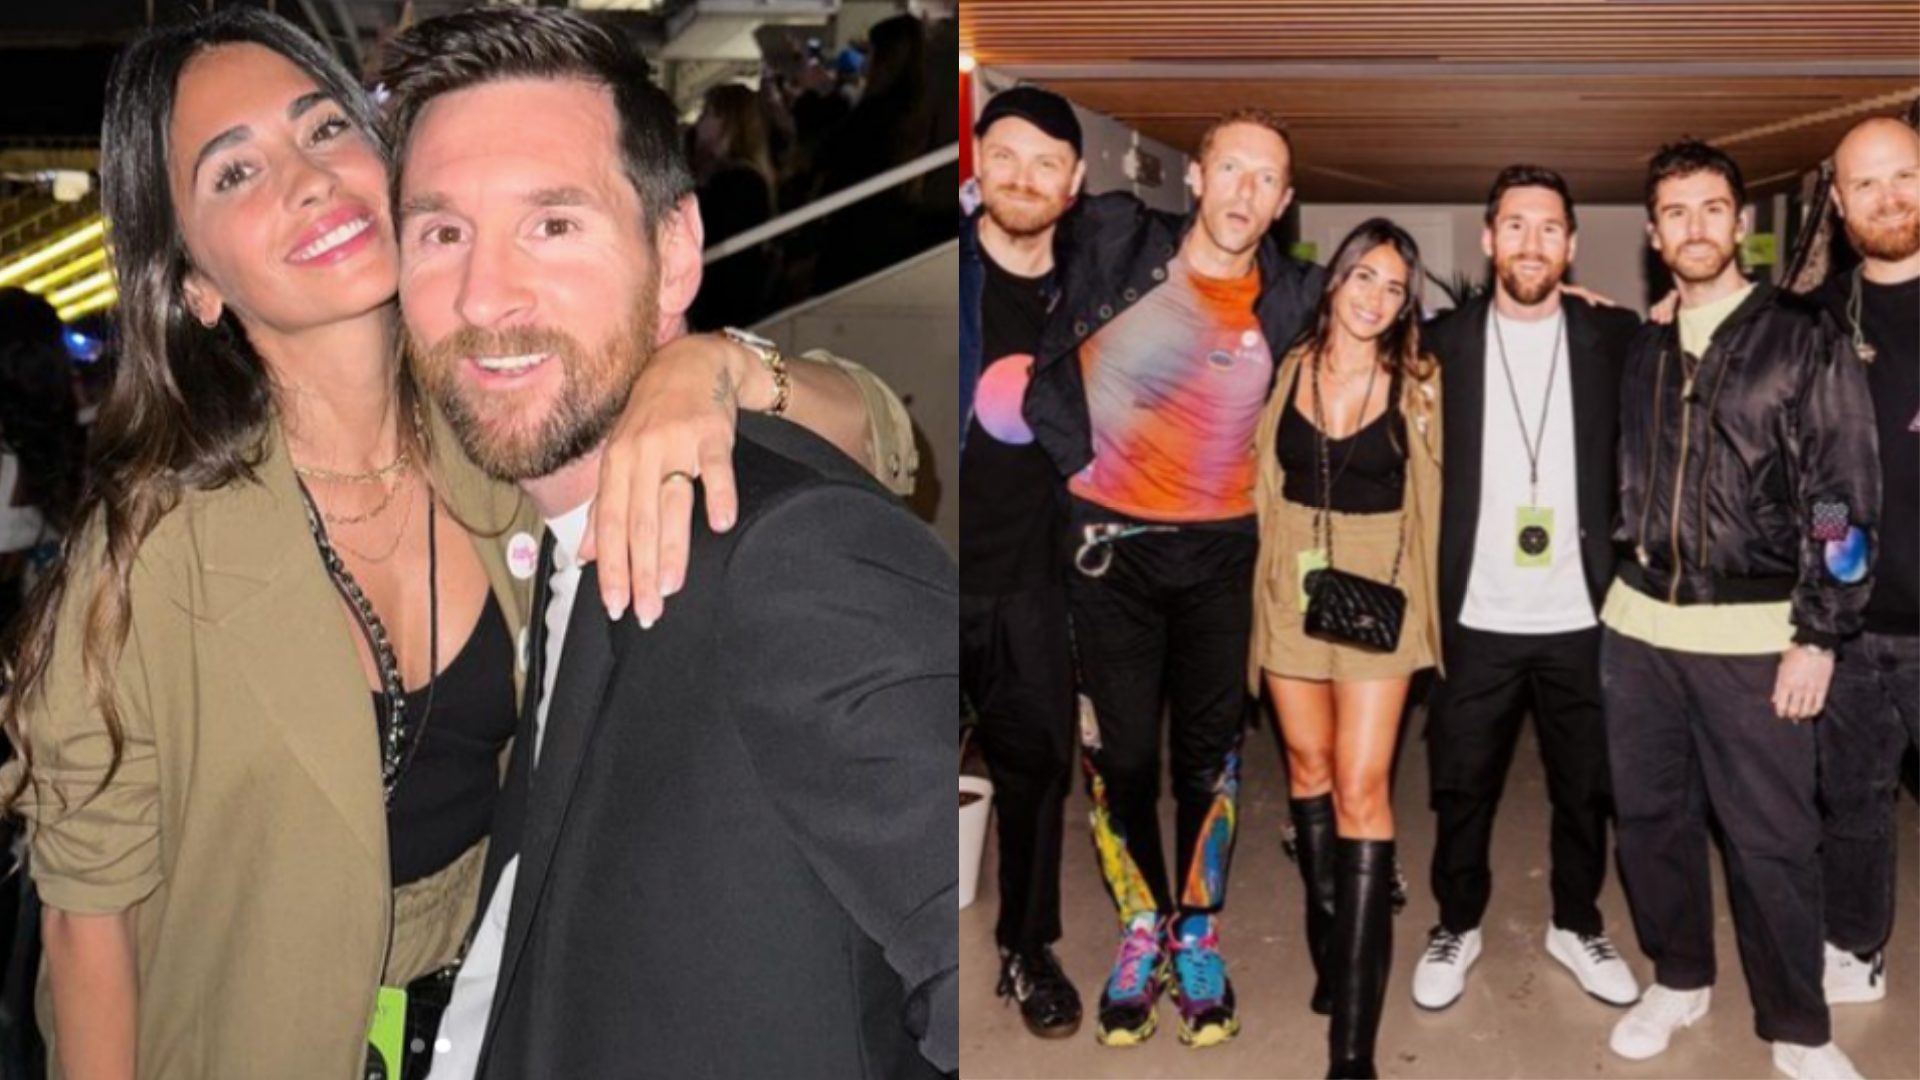 Lionel Messi & Antonela Roccuzzo enjoy 'magical night' seeing Coldplay as PSG star skips awards ceremony for sell-out concert